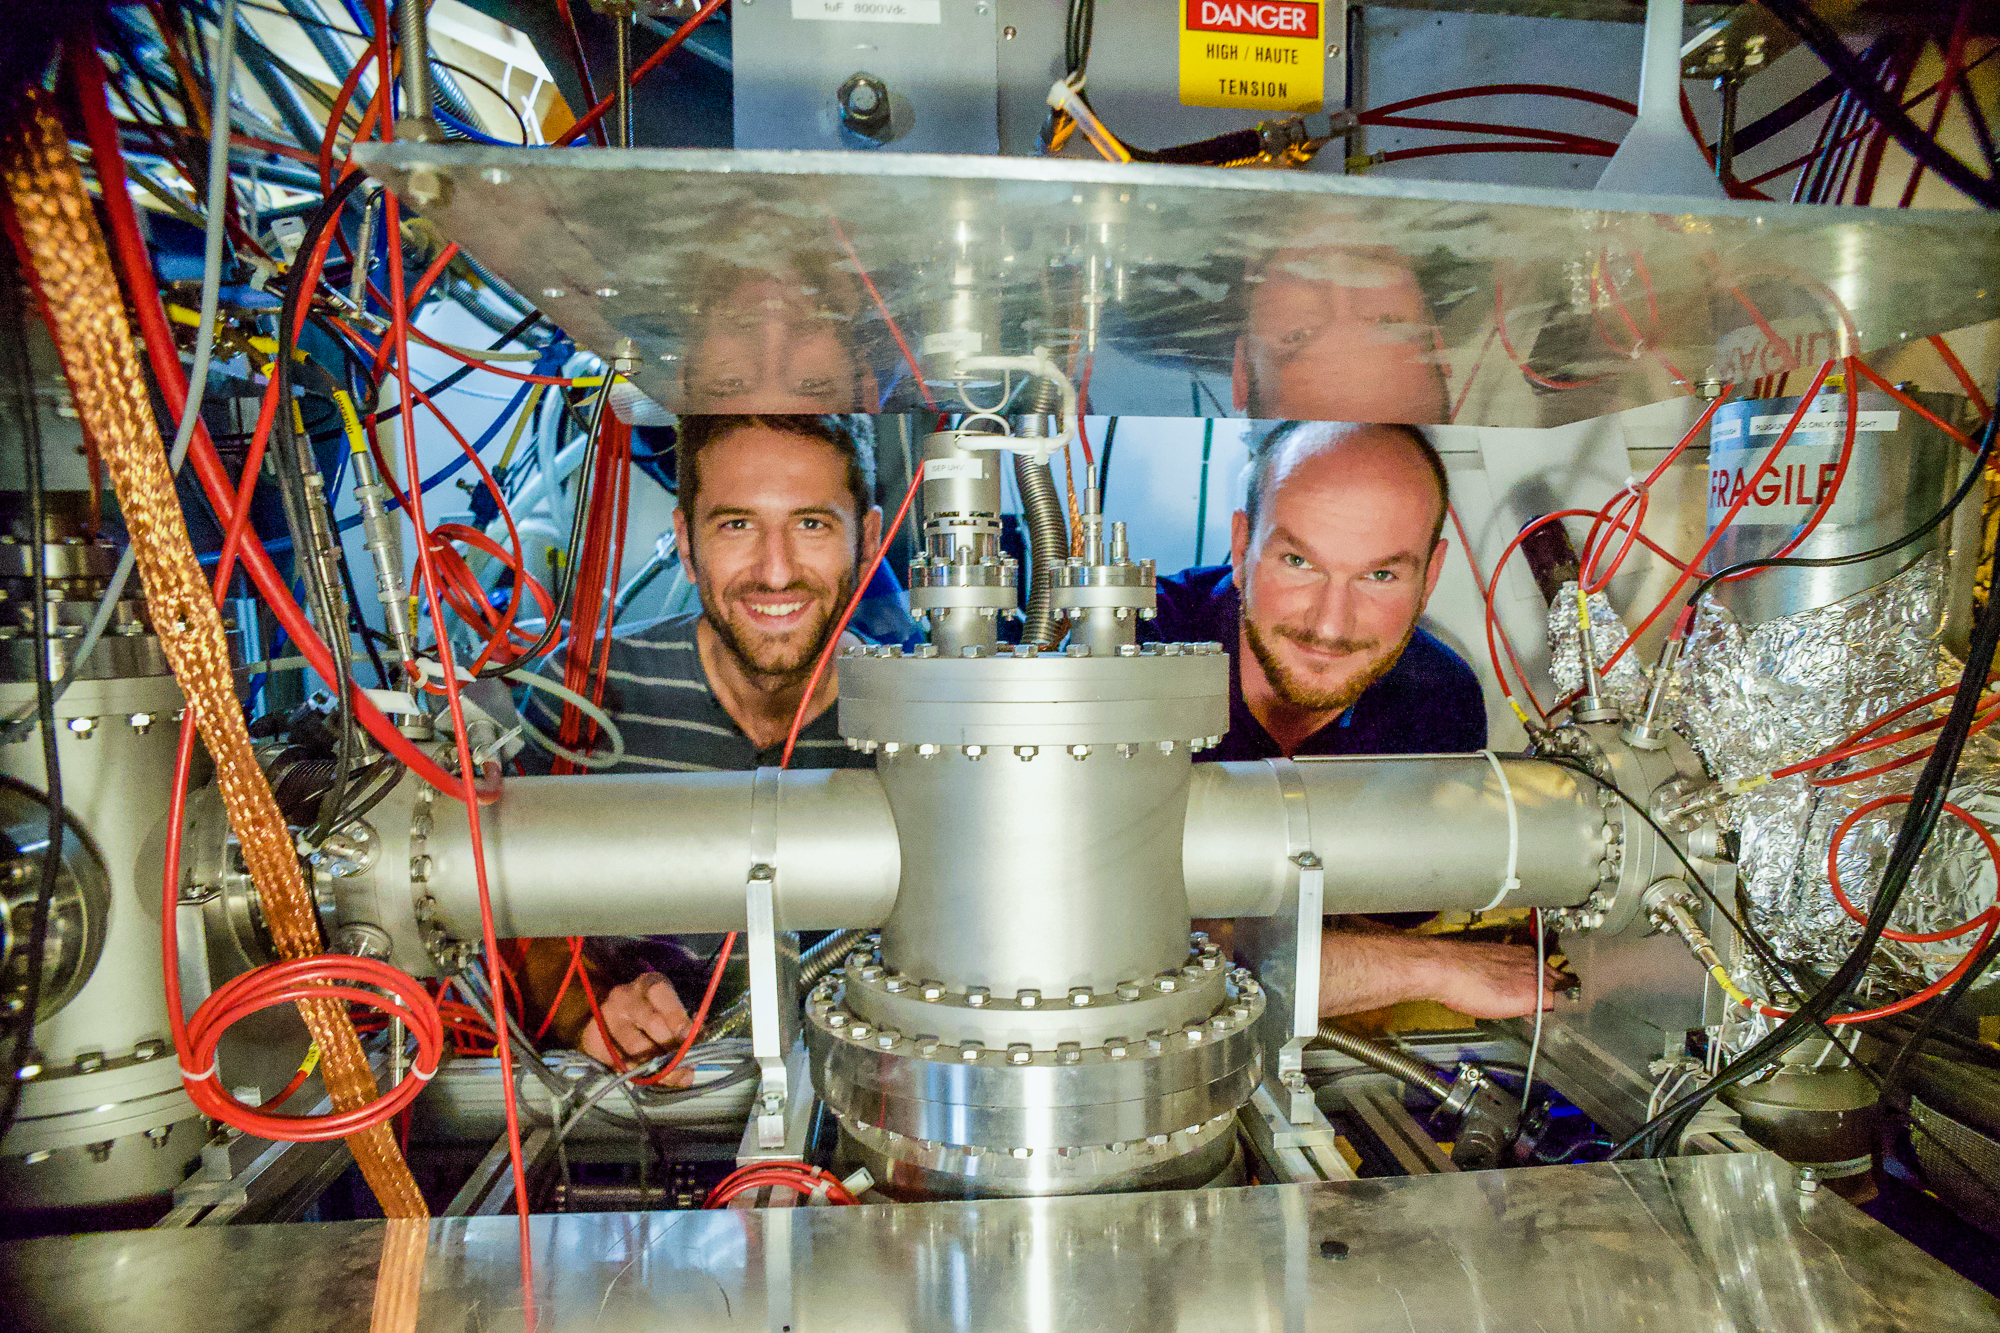 Dinko Atanasov and Frank Wienholtz (on the right) behind the MR-ToF MS component of the ISOLTRAP setup in the ISOLDE experimental hall at CERN, ©Jonas_Karthein.